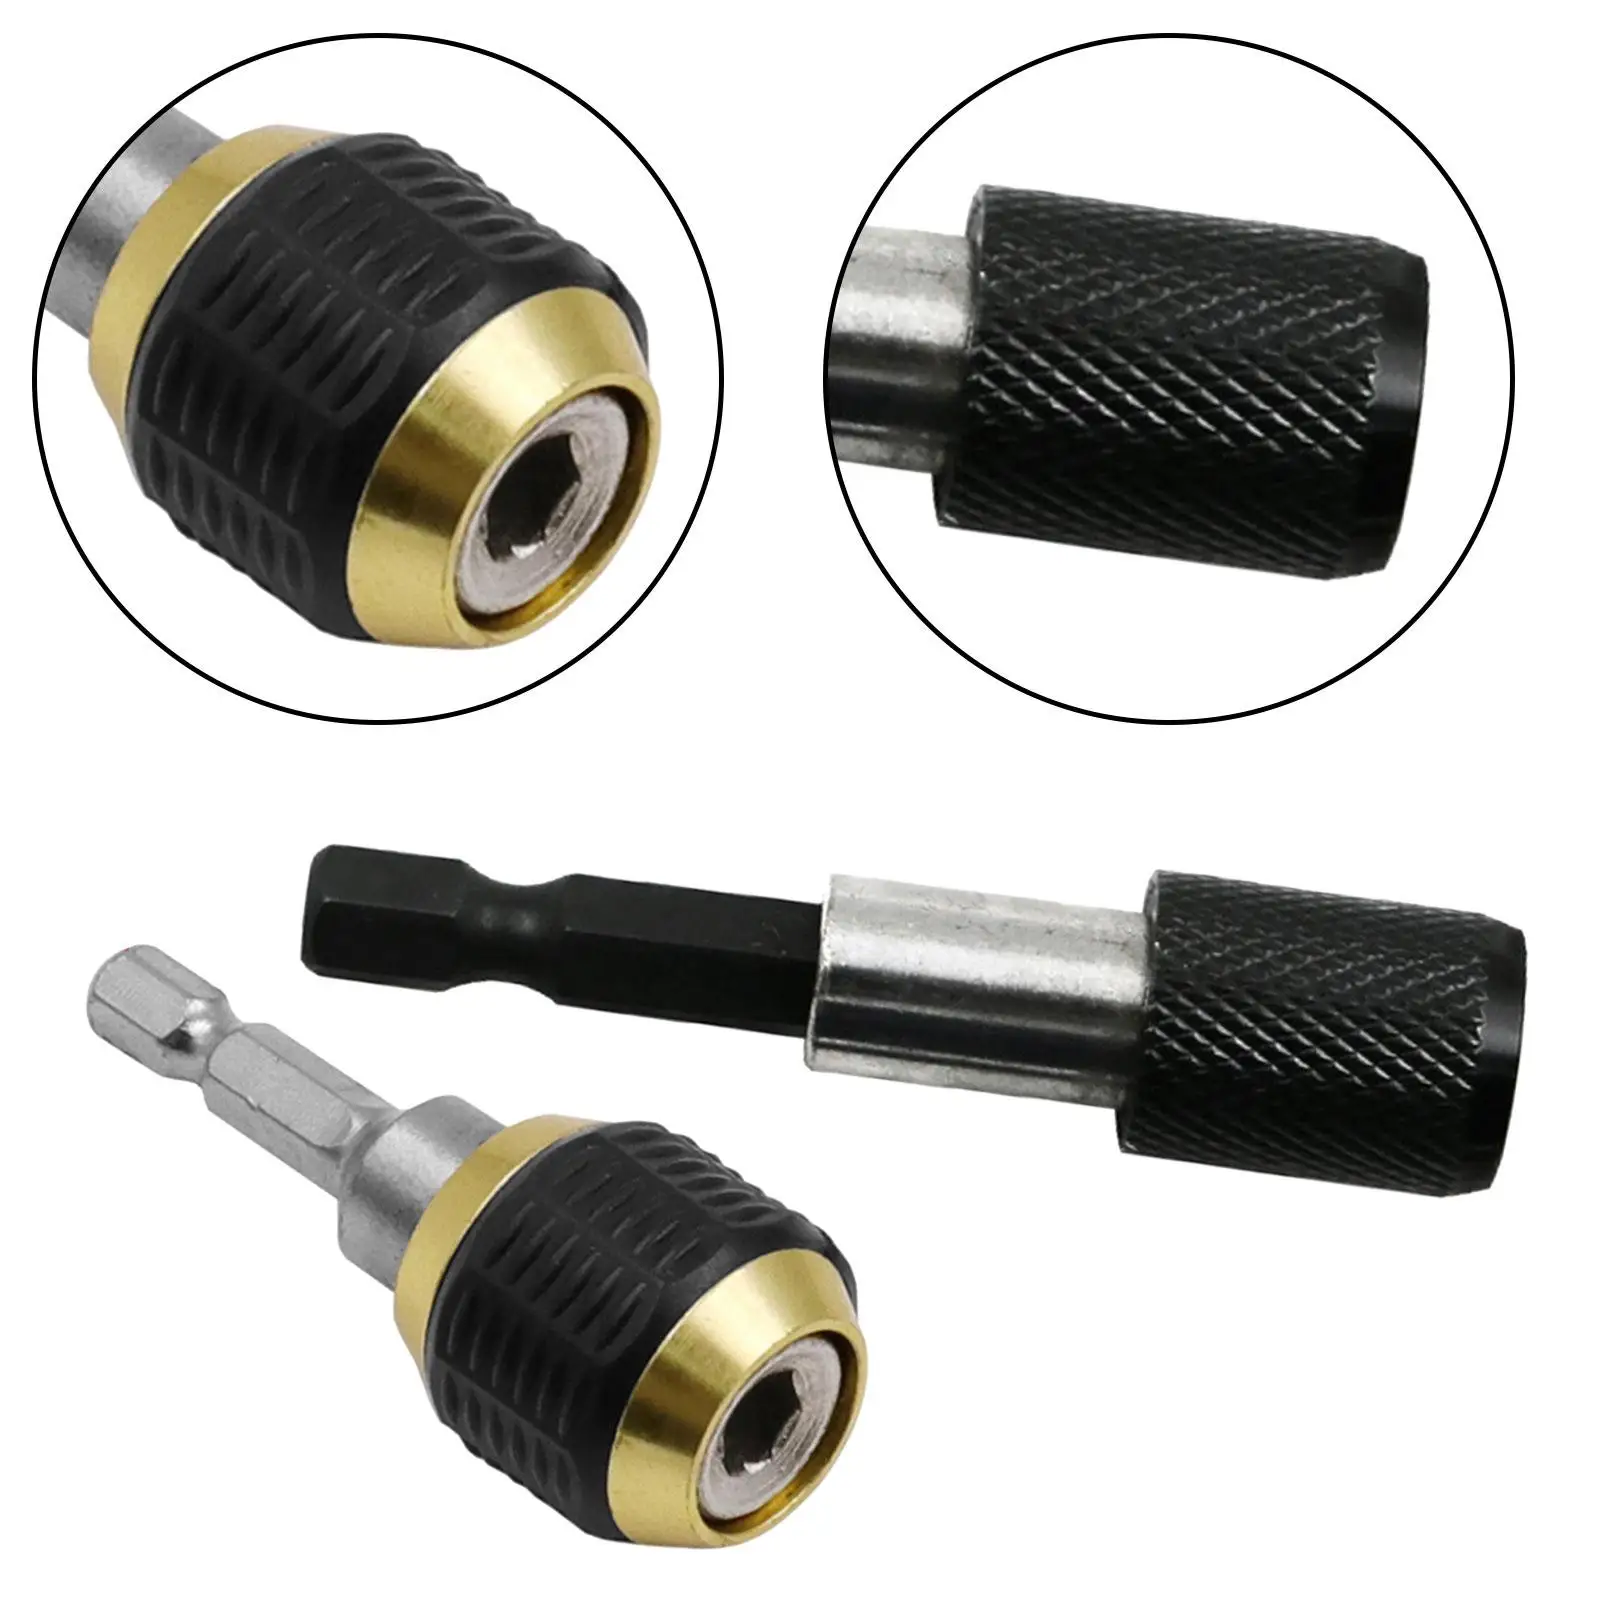 Durable Drill Change Adapter Easily Install Conversion tool Screwdriver for Replacement Accessory Popup Converter Tool